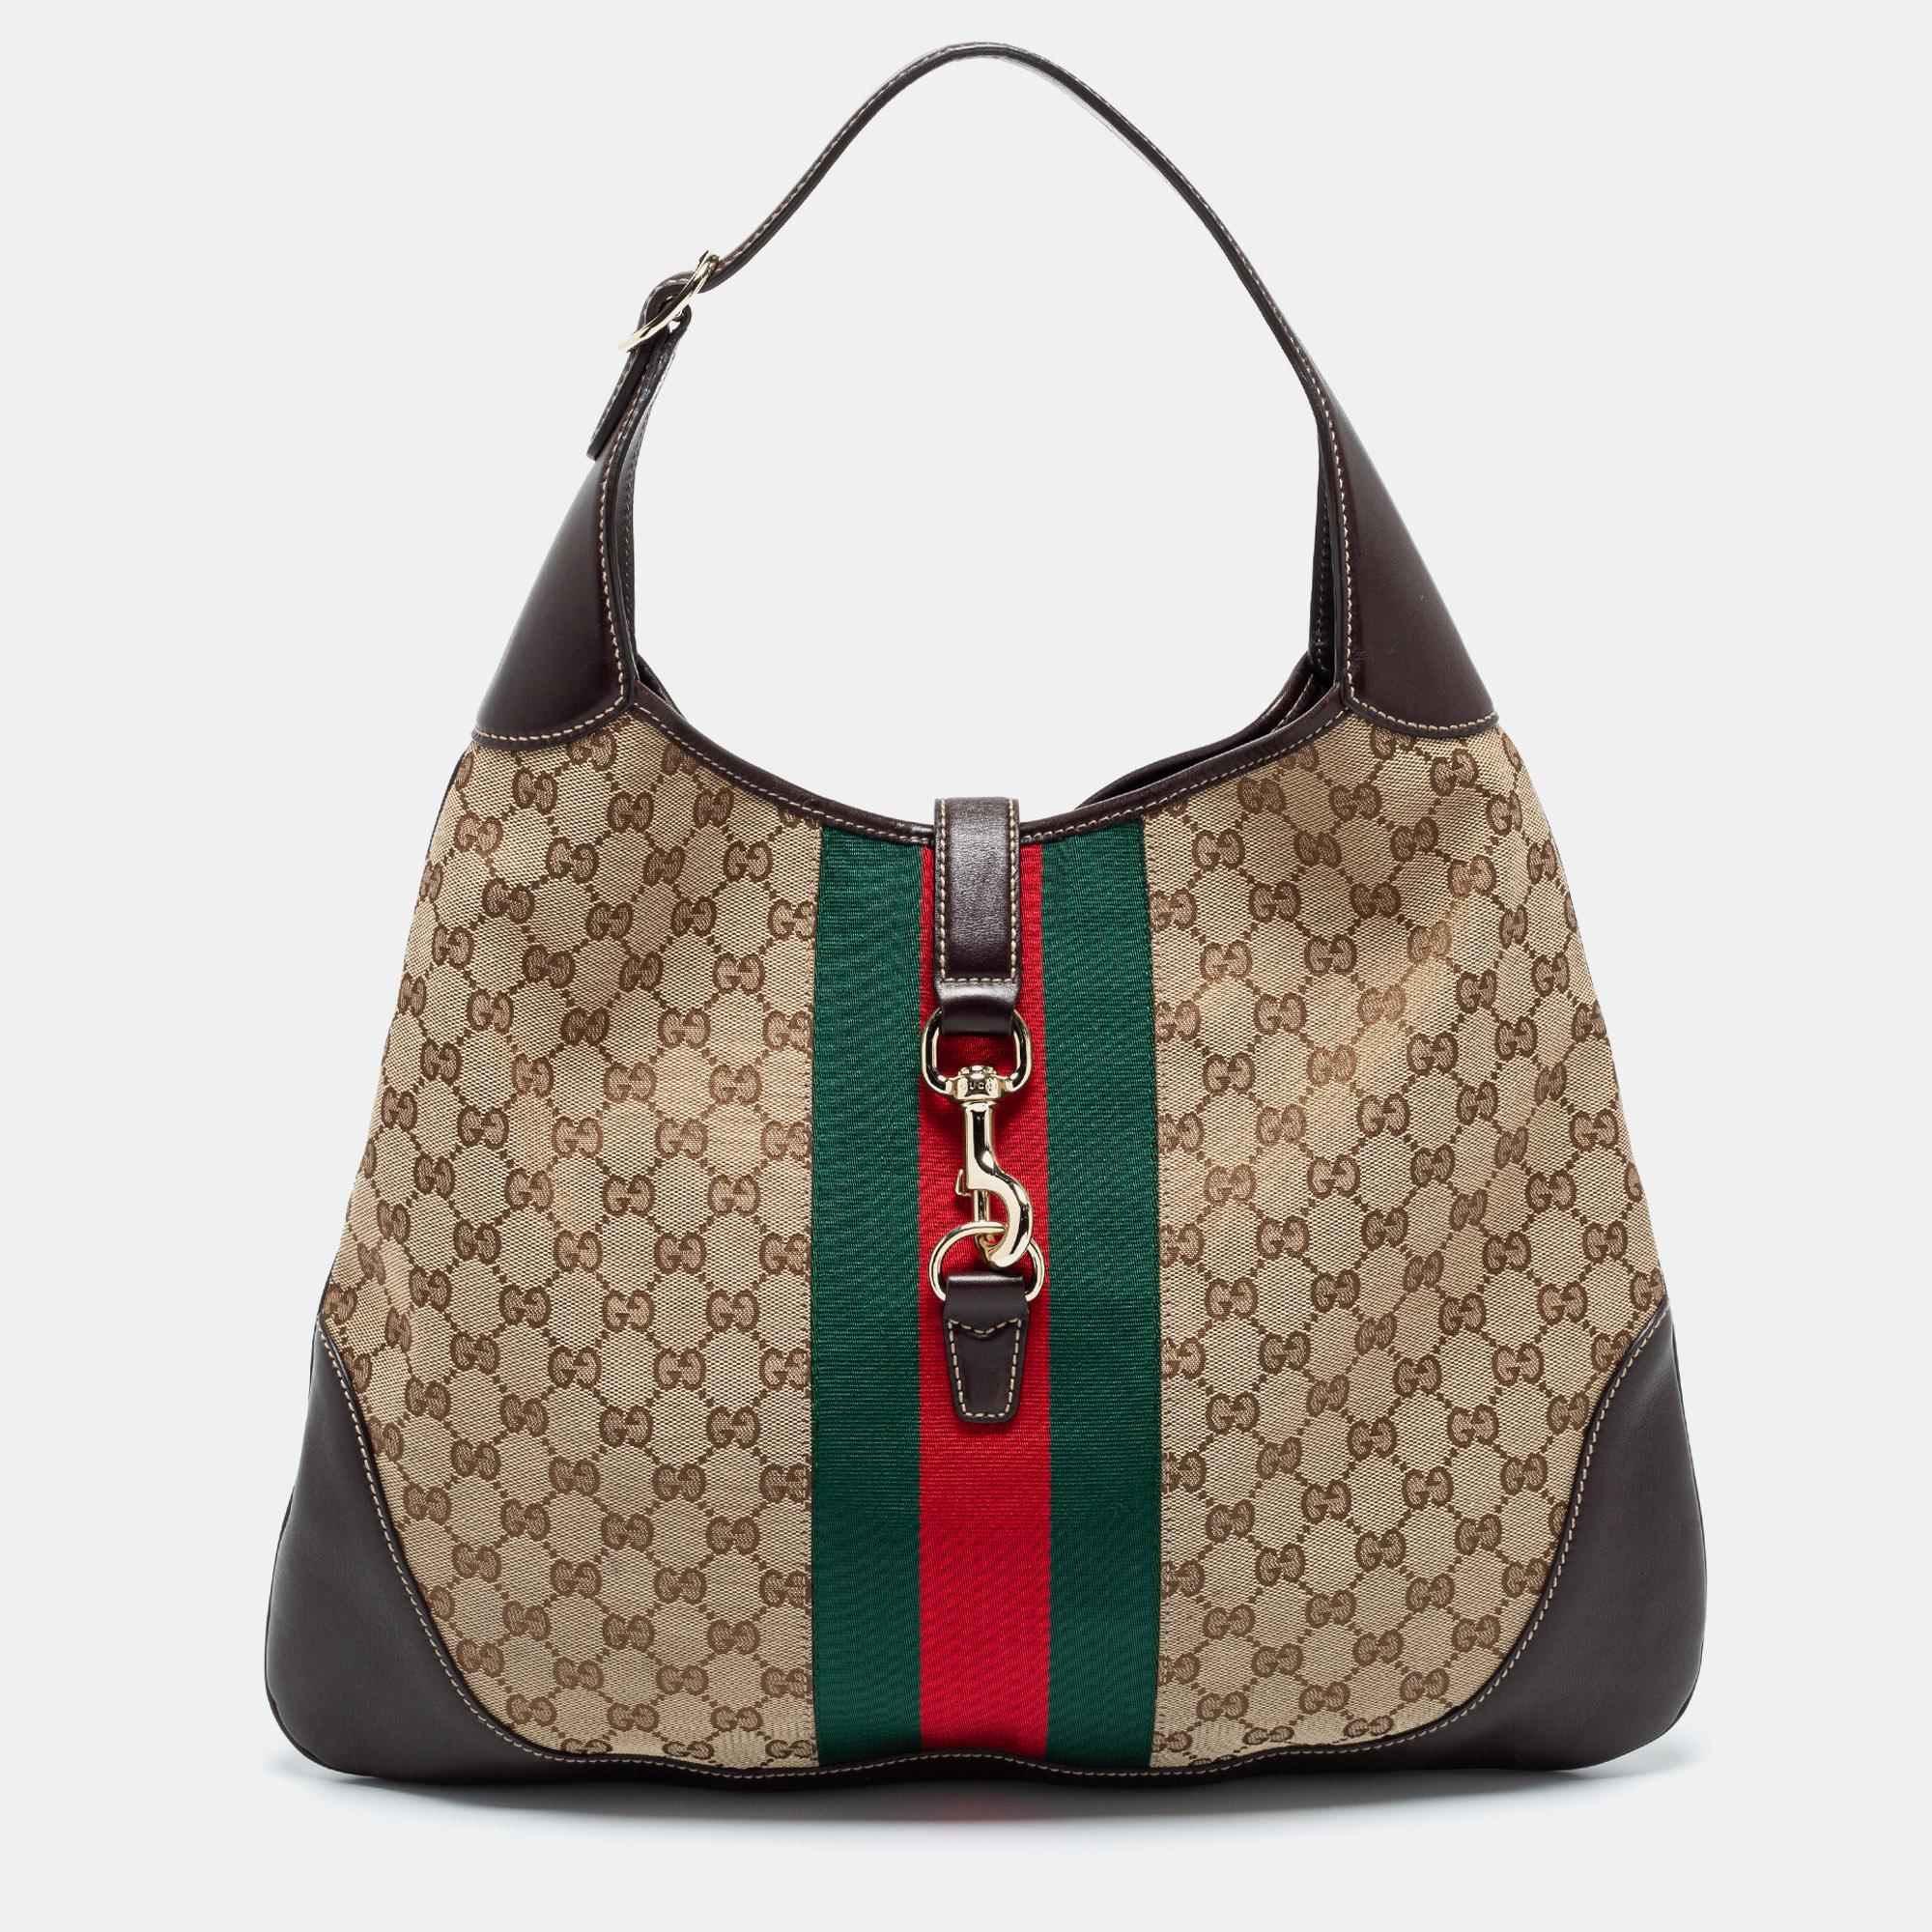 Iconic and captivating, this Jackie O Bouvier hobo comes from the House of Gucci. It has been crafted from beige-ebony GG canvas and leather, with a Web trim and lock closure embellishing the front. It features a single handle, a leather-fabric